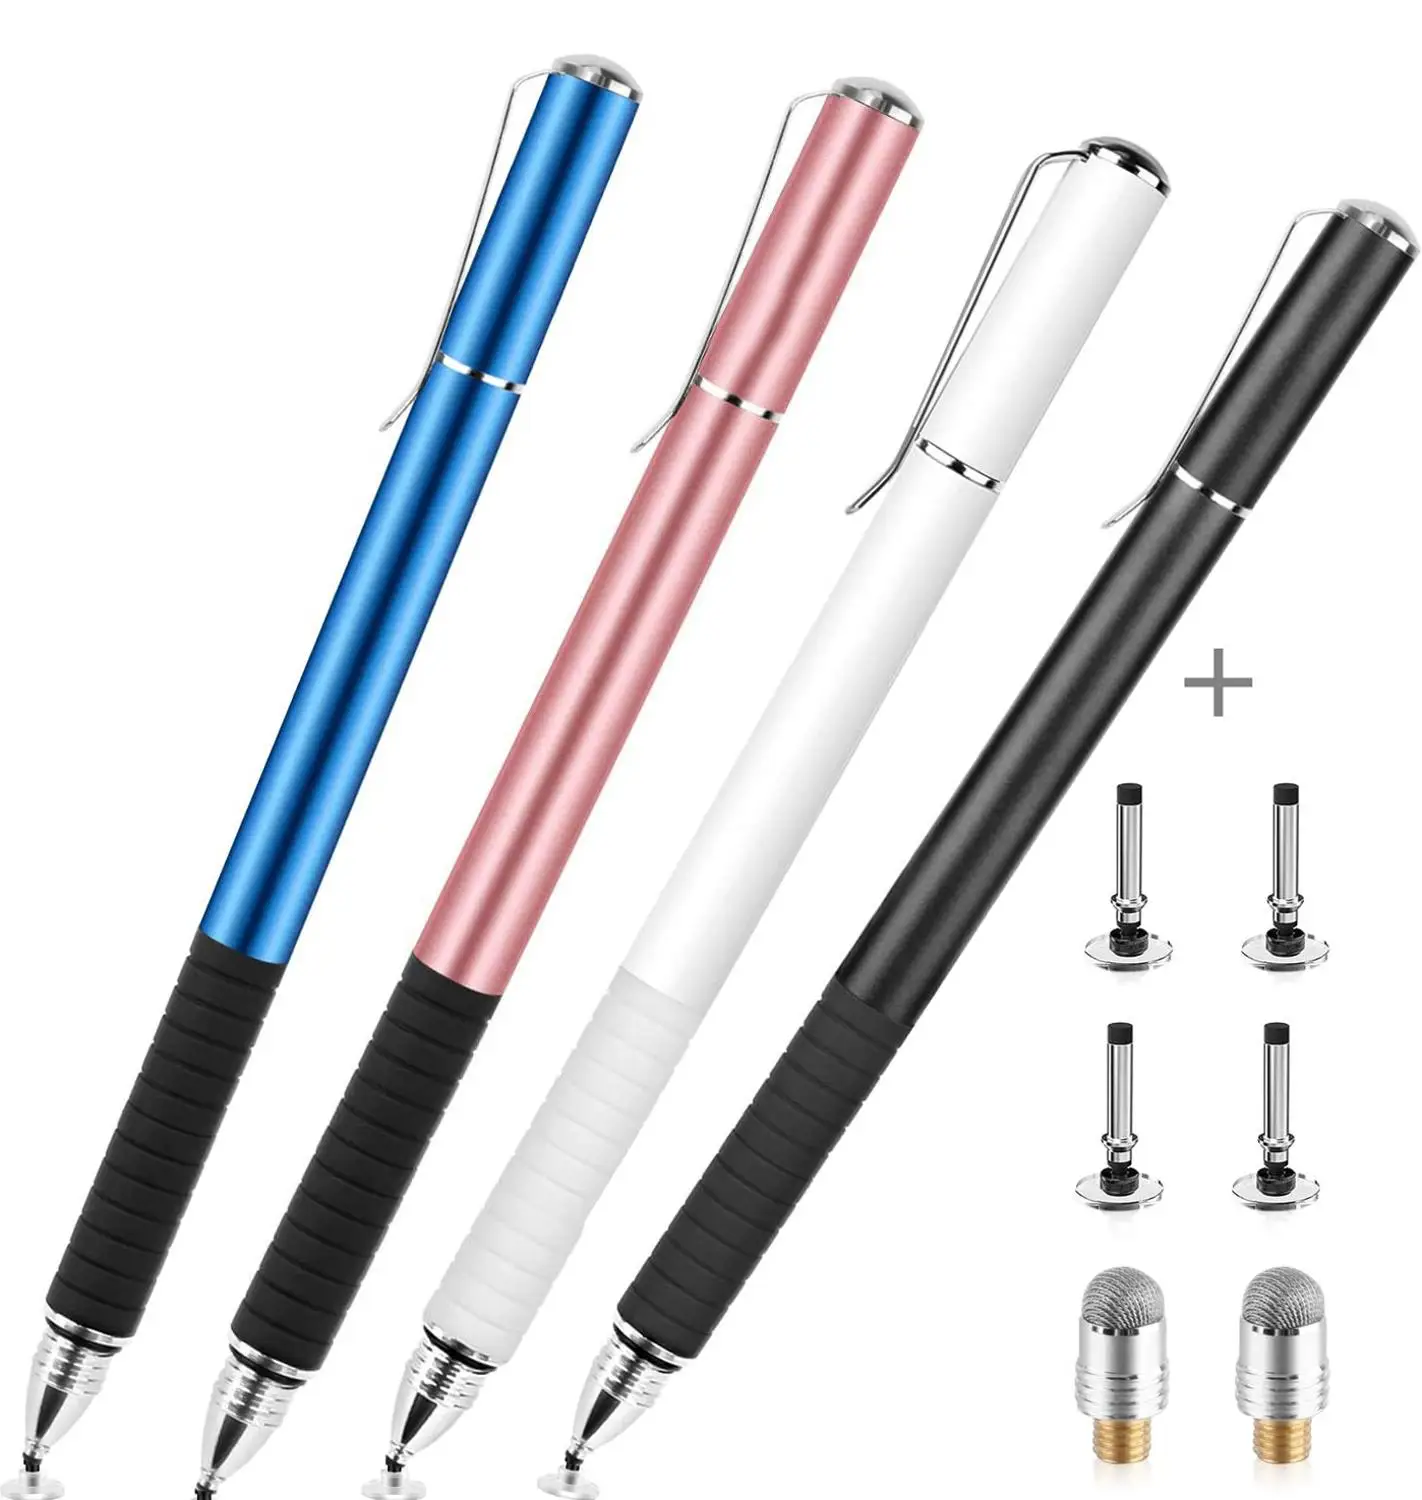 

Fiber Stylus 2 in 1 Disc Stylus Pen Universal Mesh Fiber Tip Series Precision Touch Screen Pens for All Capacitive Touch Screens